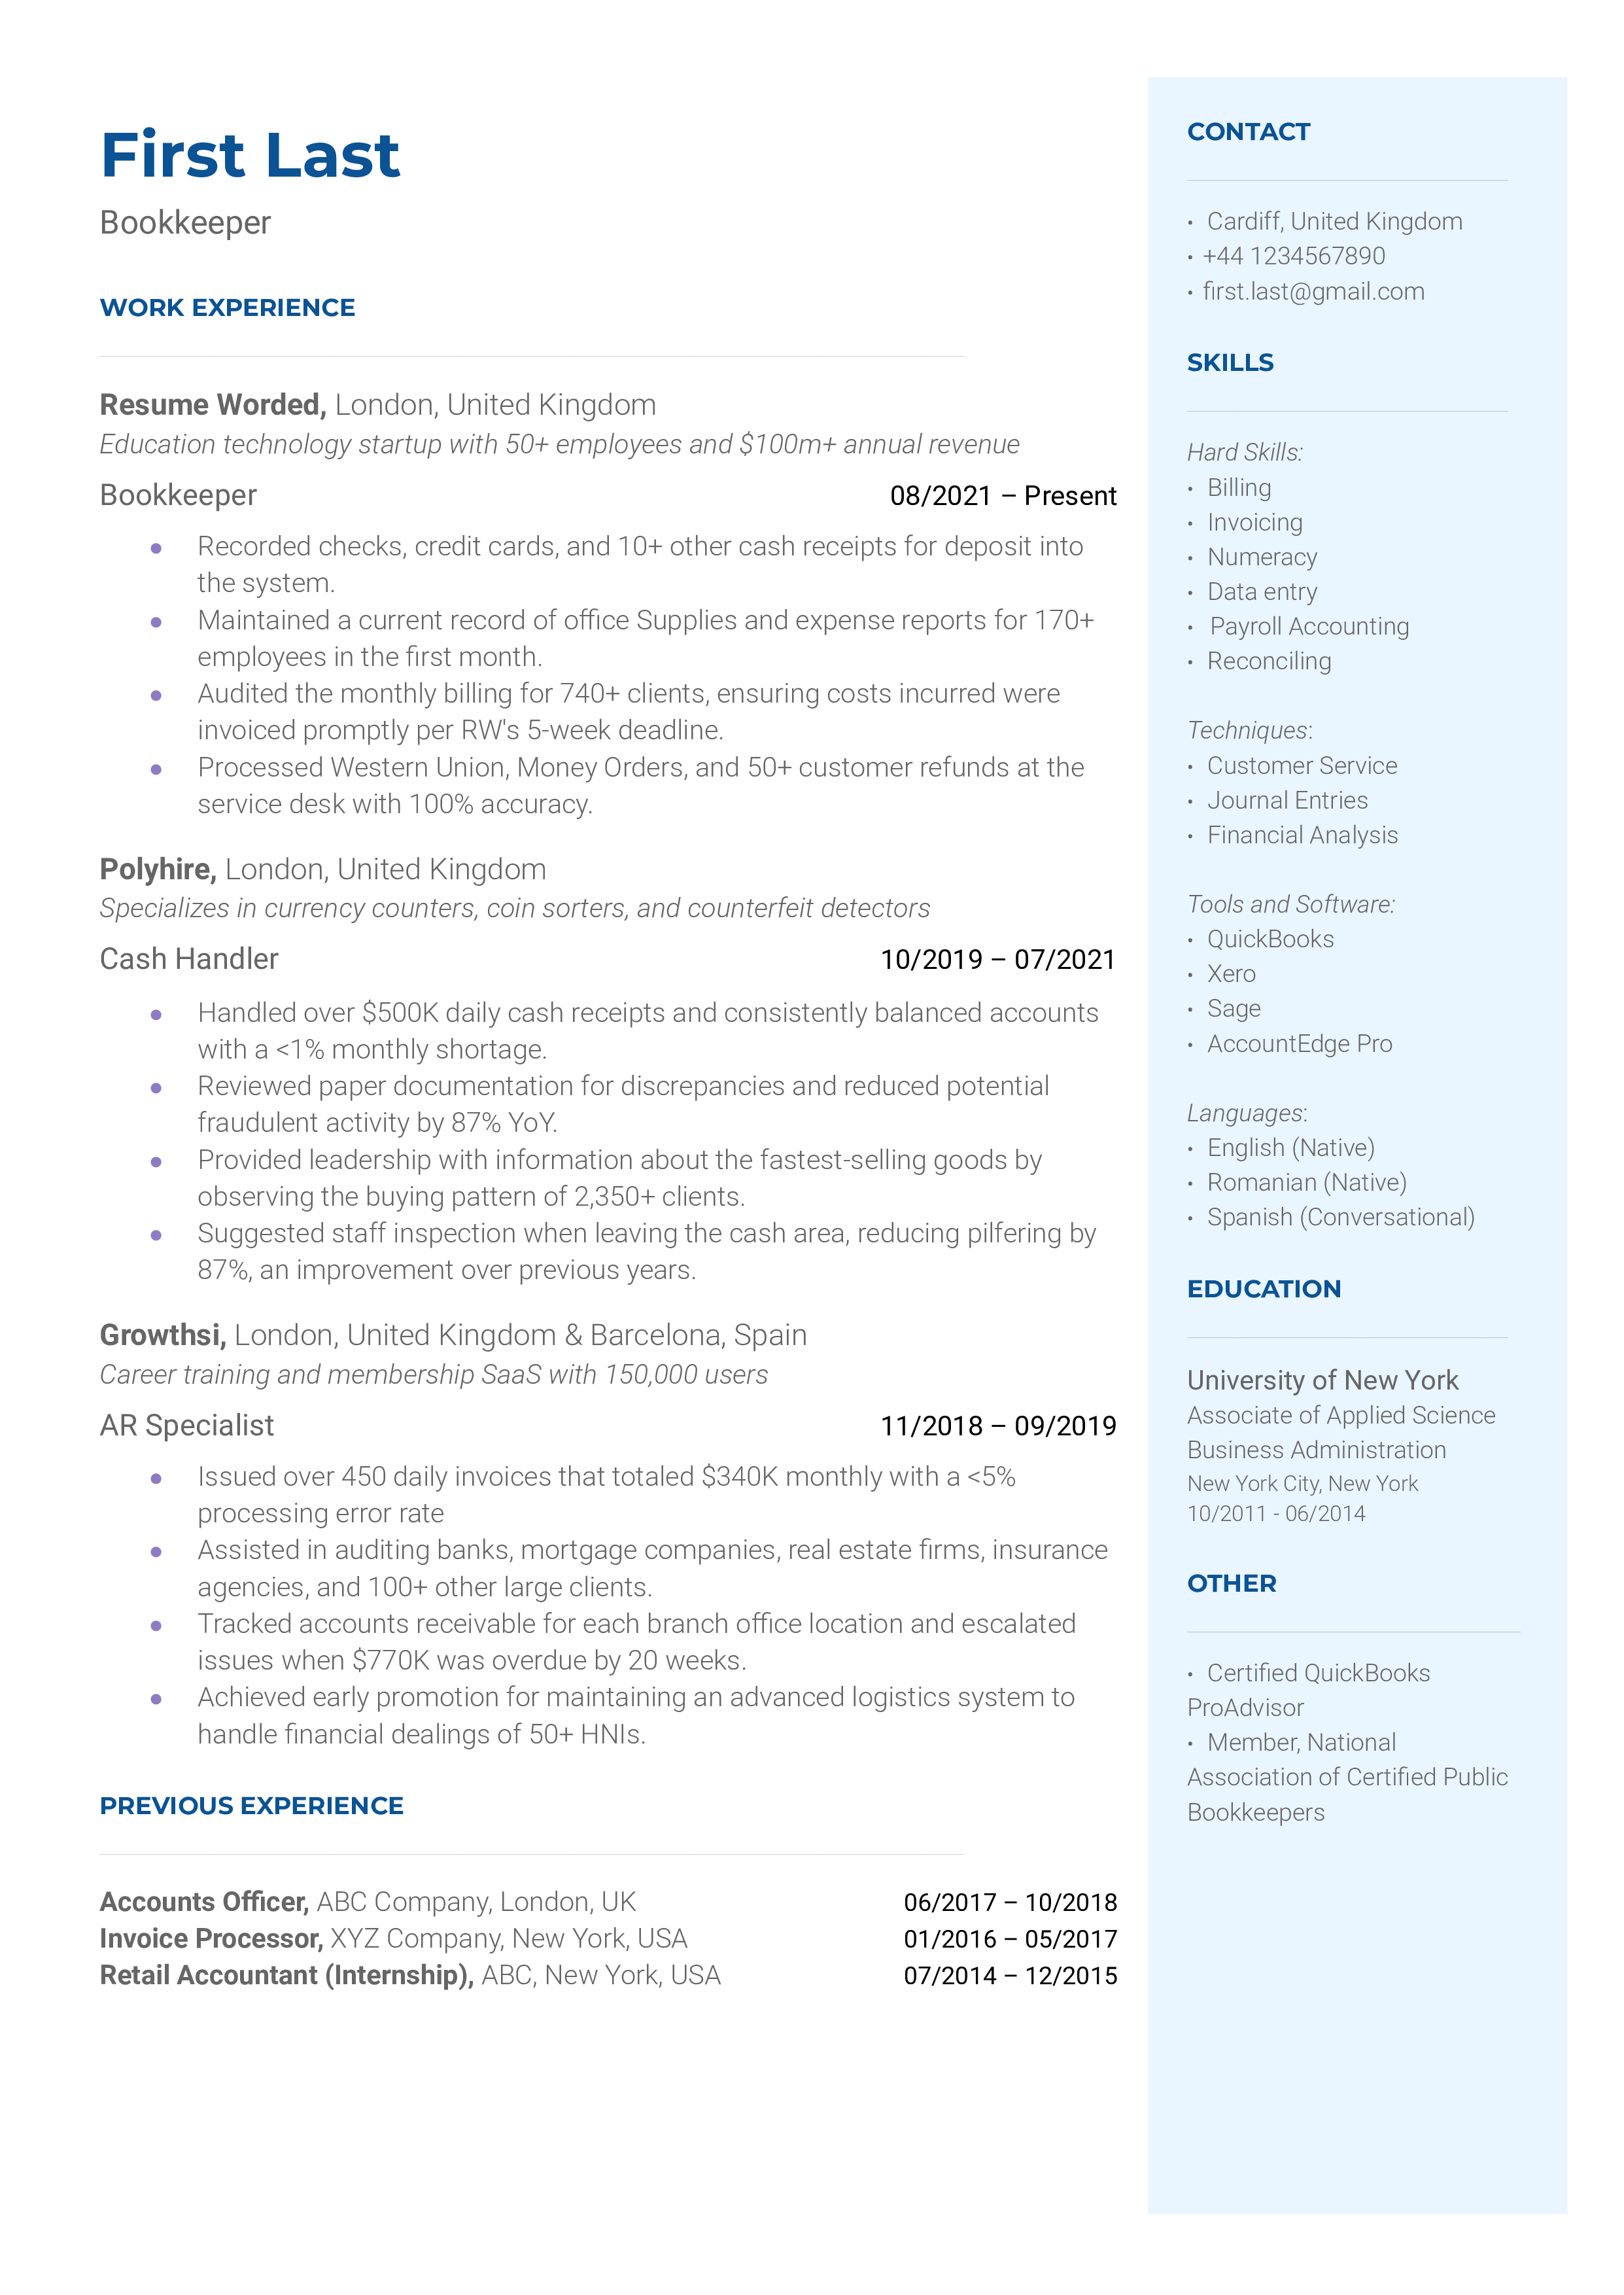 A professional bookkeeper's well-organized resume showcasing software expertise and attention to detail.